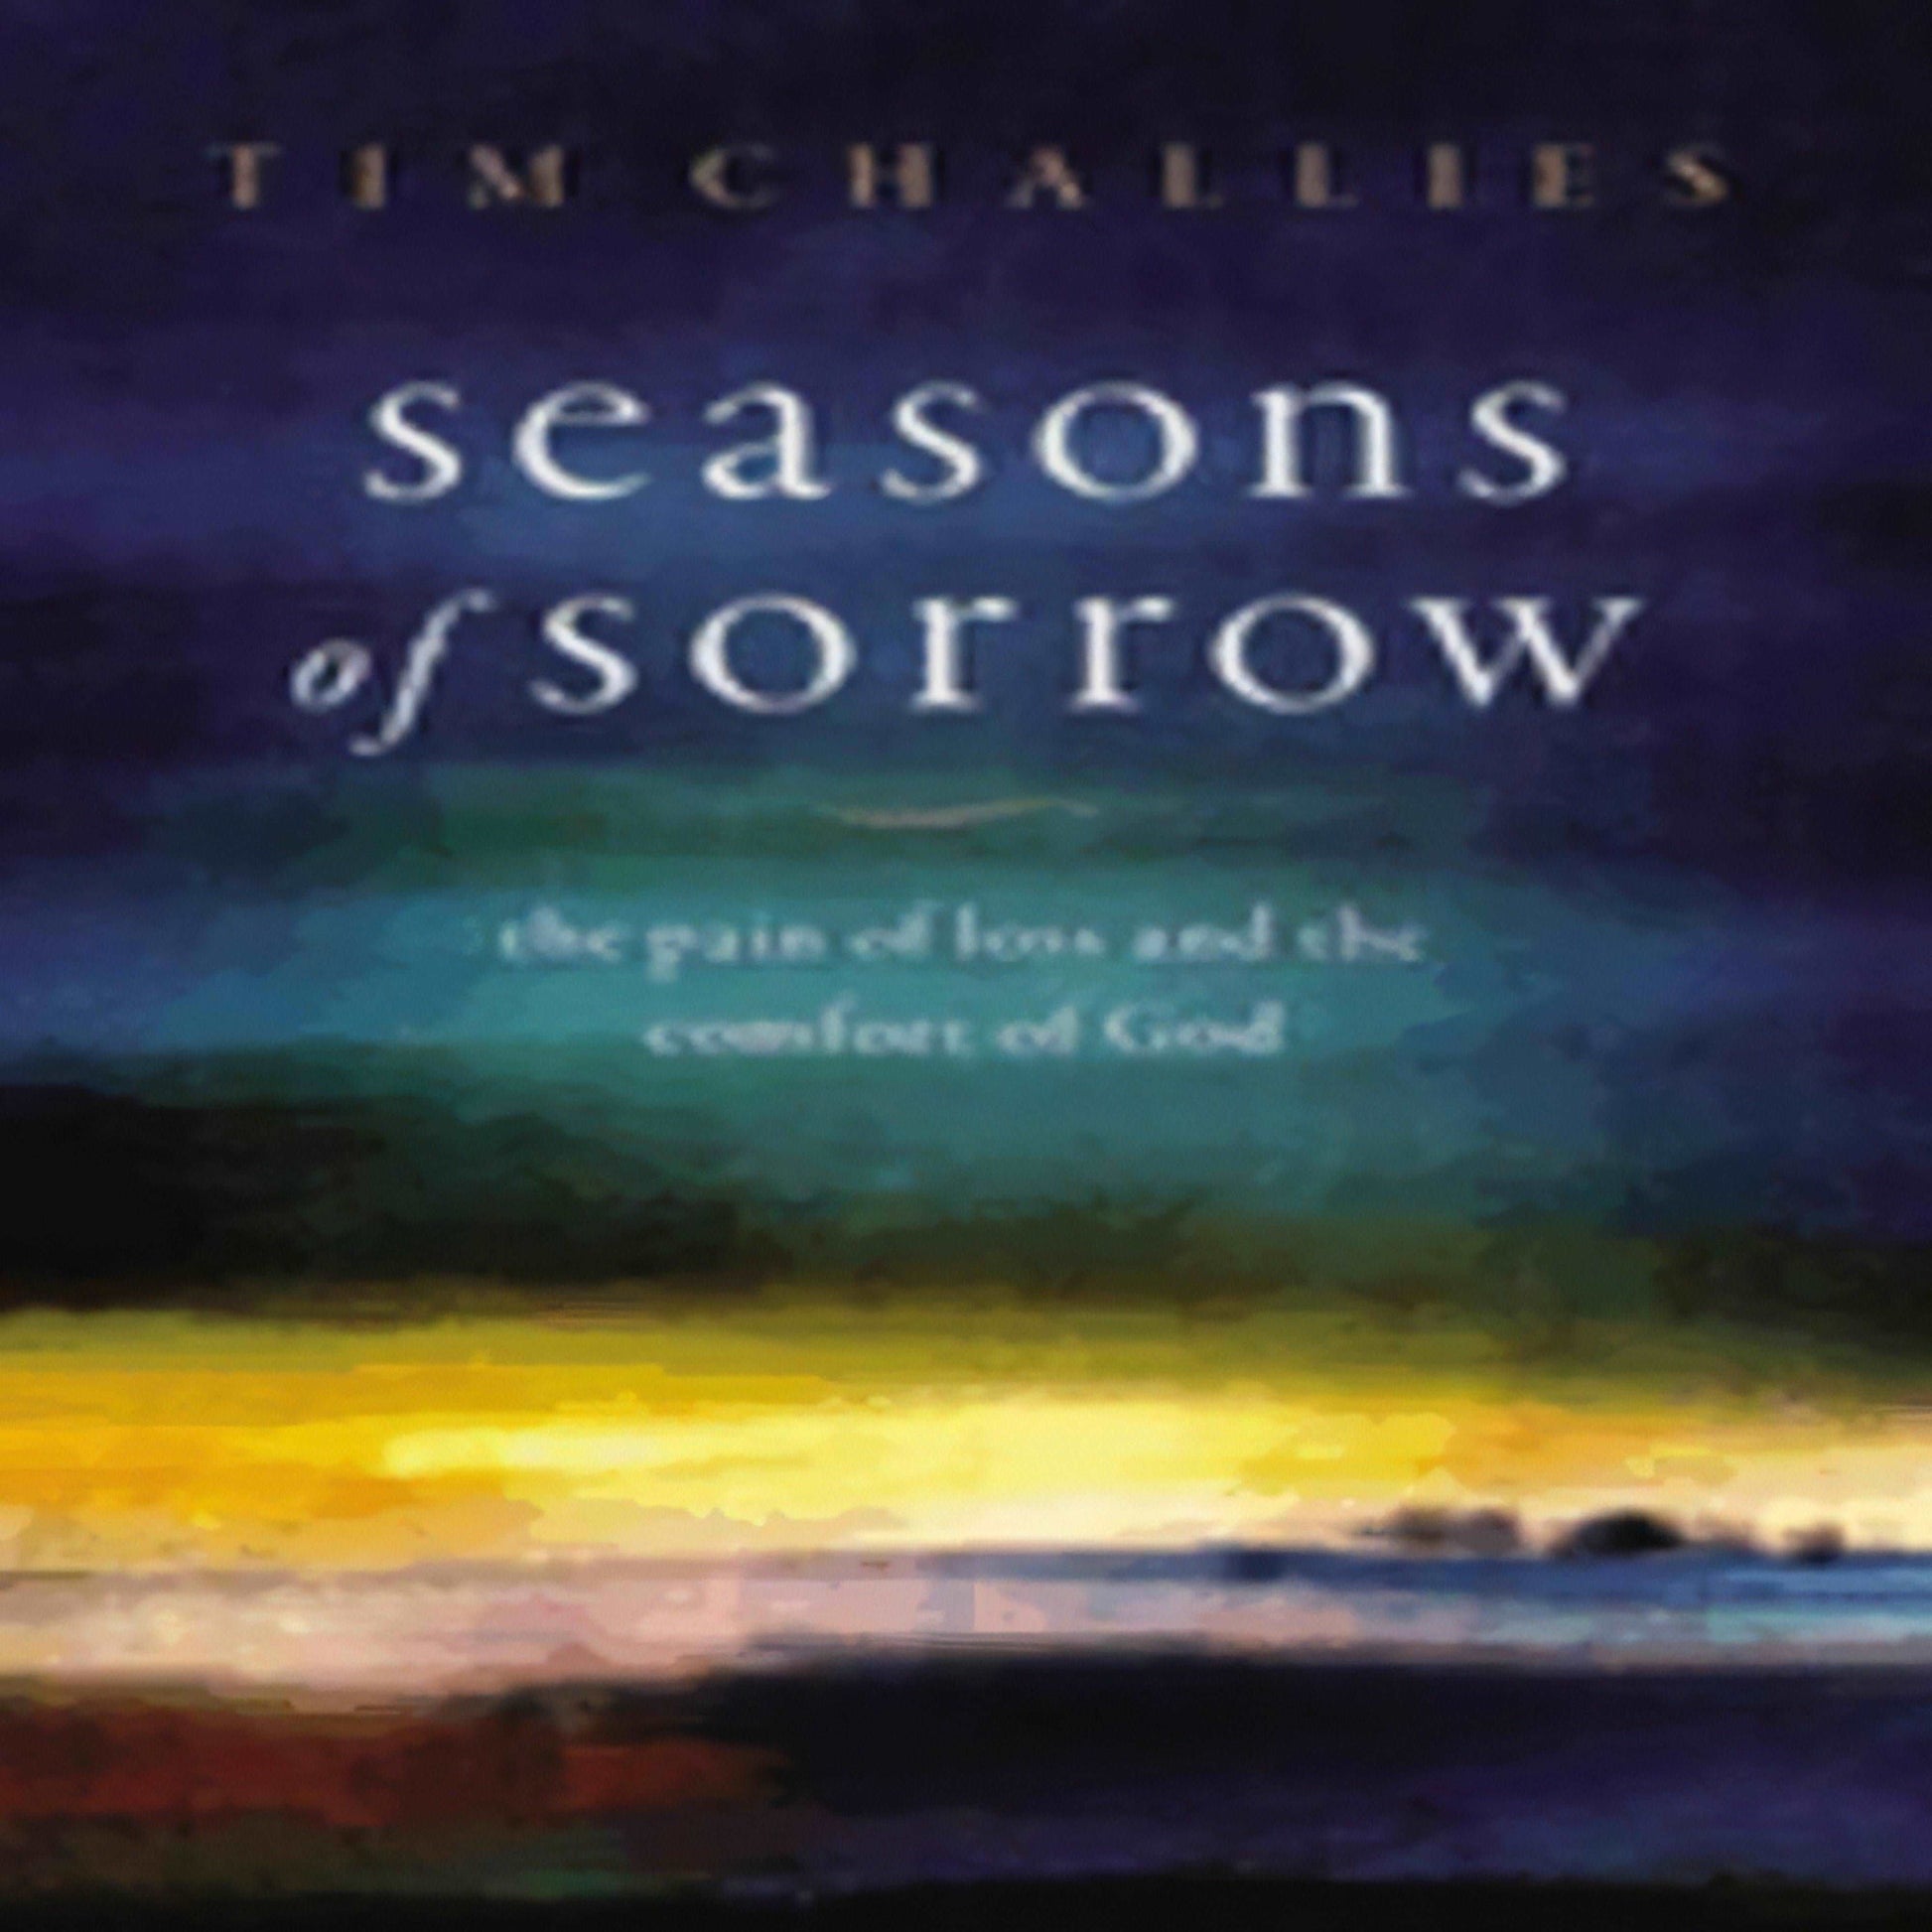 Seasons of Sorrow: The Pain of Loss and the Comfort of God231-031623-0310136733DPGBOOKSTORE.COM. Today's Bestsellers.